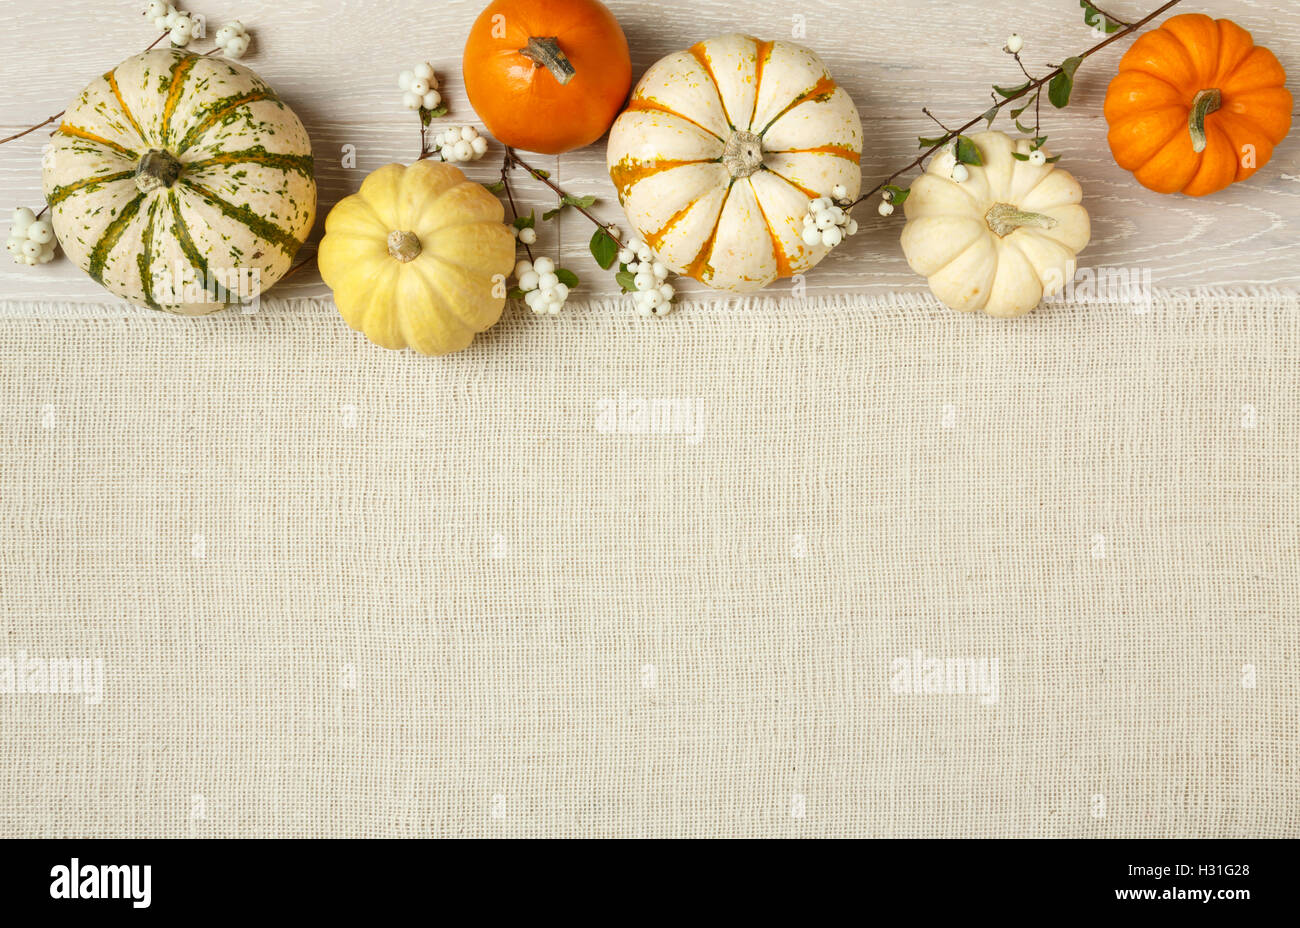 Miniature pumpkins on rustic wood and burlap cloth background. Simple, natural country style fall autumn decorations. Stock Photo